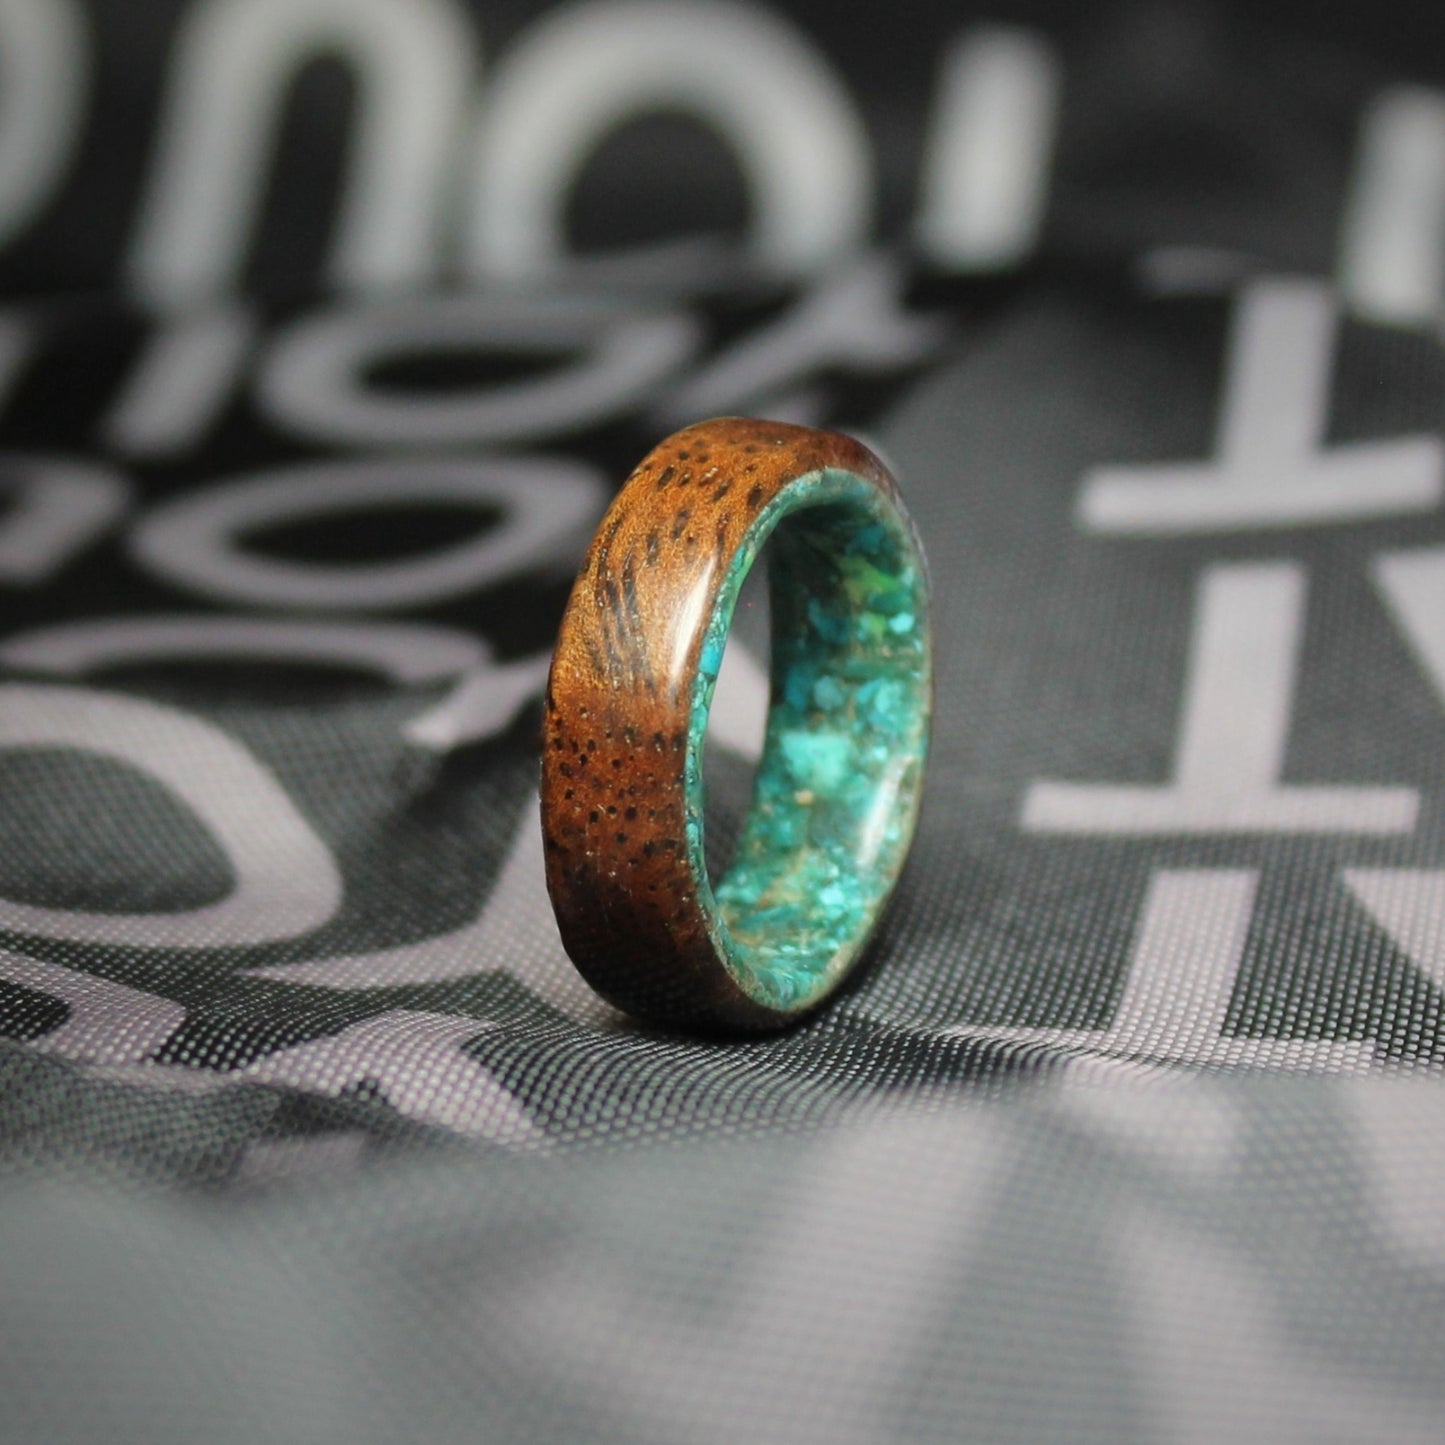 Mahogany Wood and Turquoise Glow Core Ring